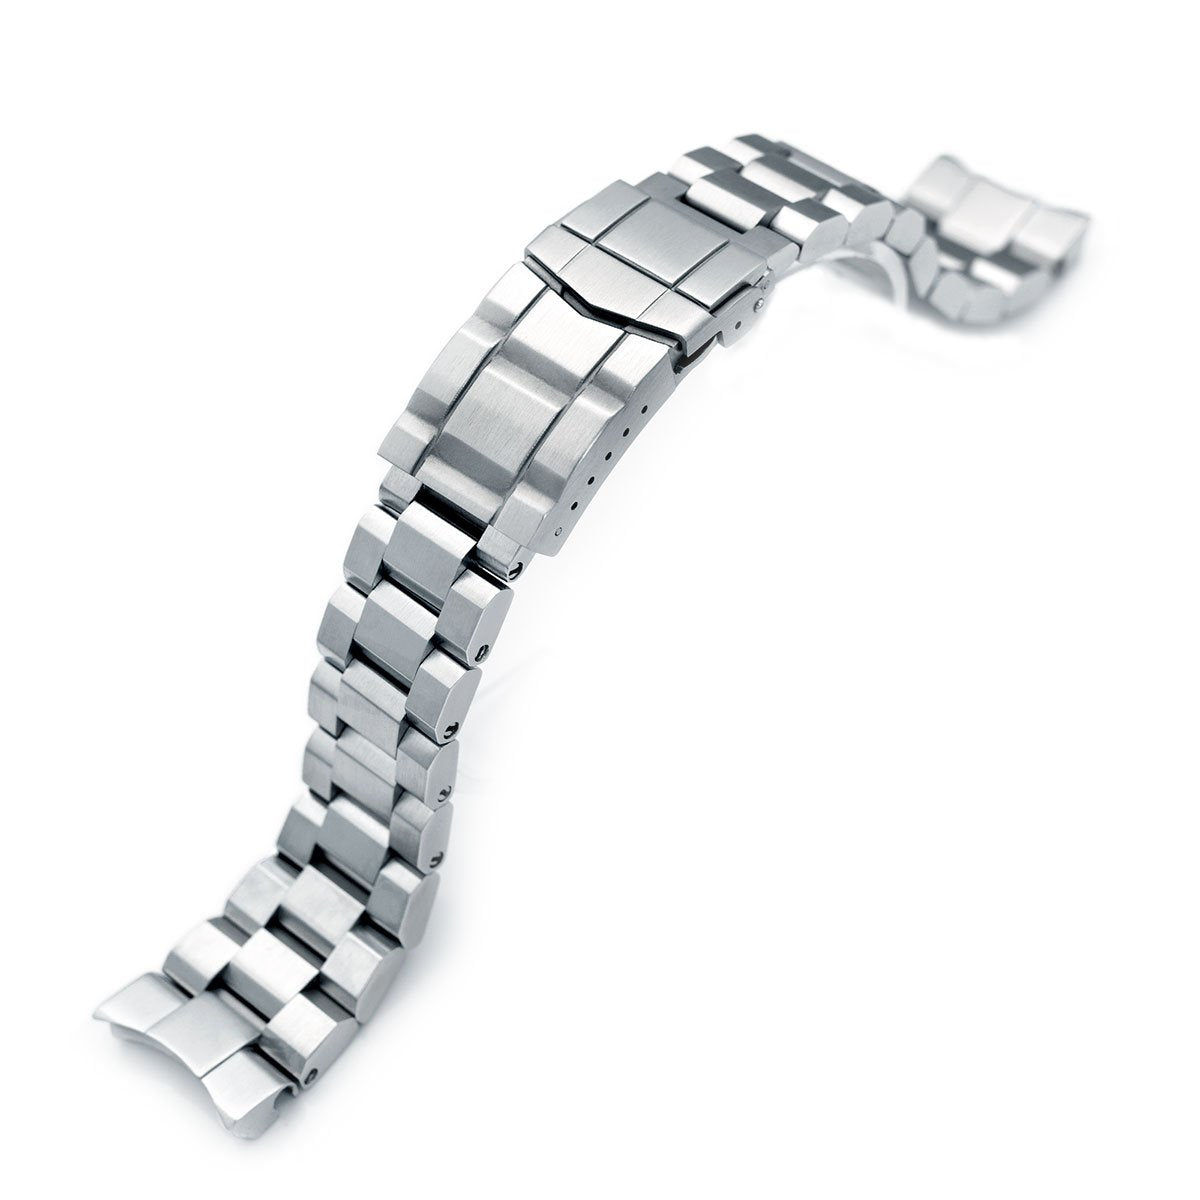 22mm Hexad 316L Stainless Steel Watch Band for Seiko Samurai SRPB51 SUB Diver Clasp Strapcode Watch Bands